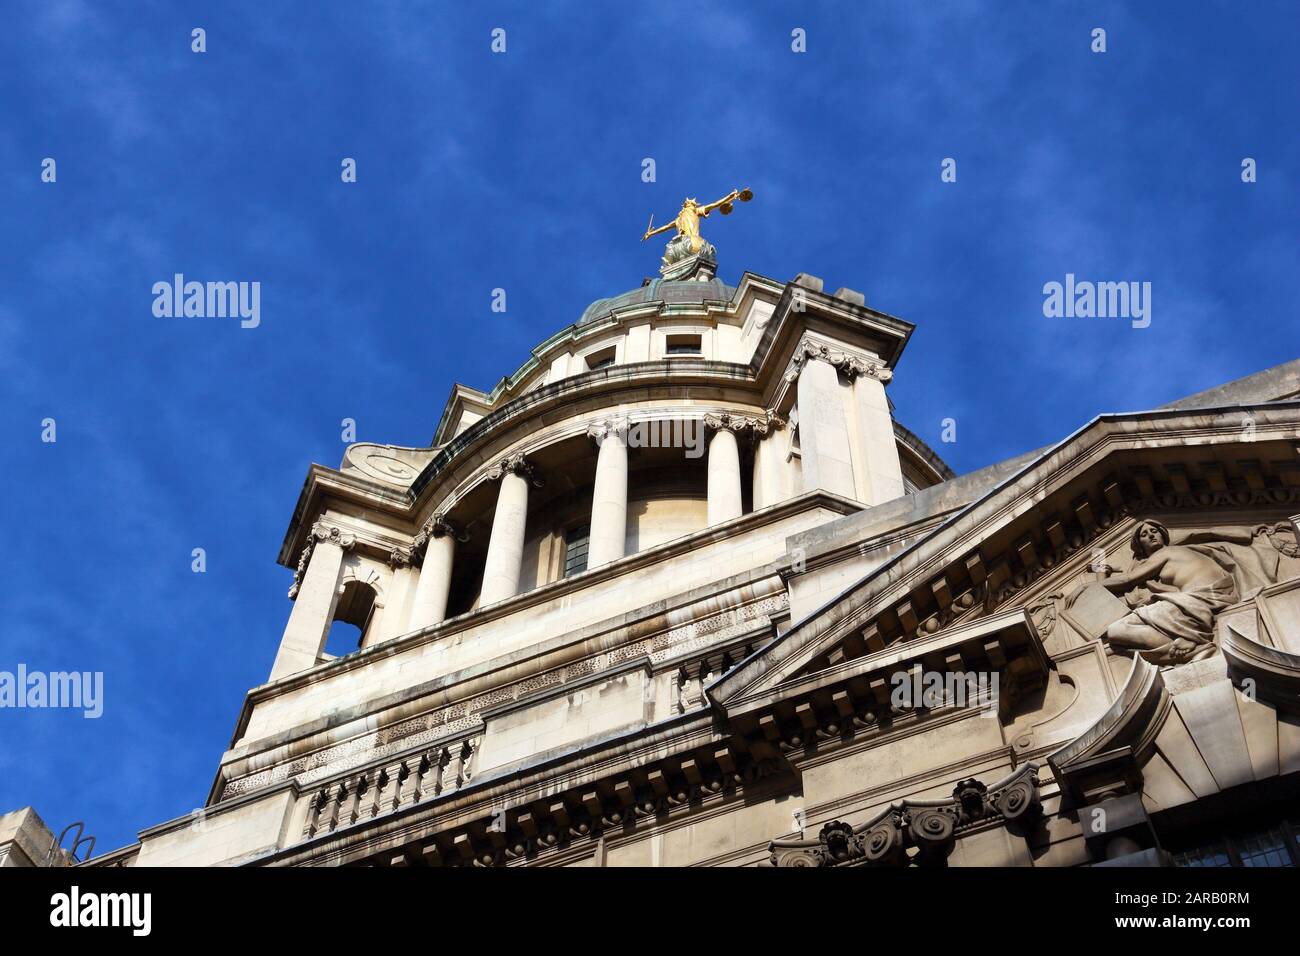 London, UK - Central Criminal Court also known as Old Bailey. Stock Photo